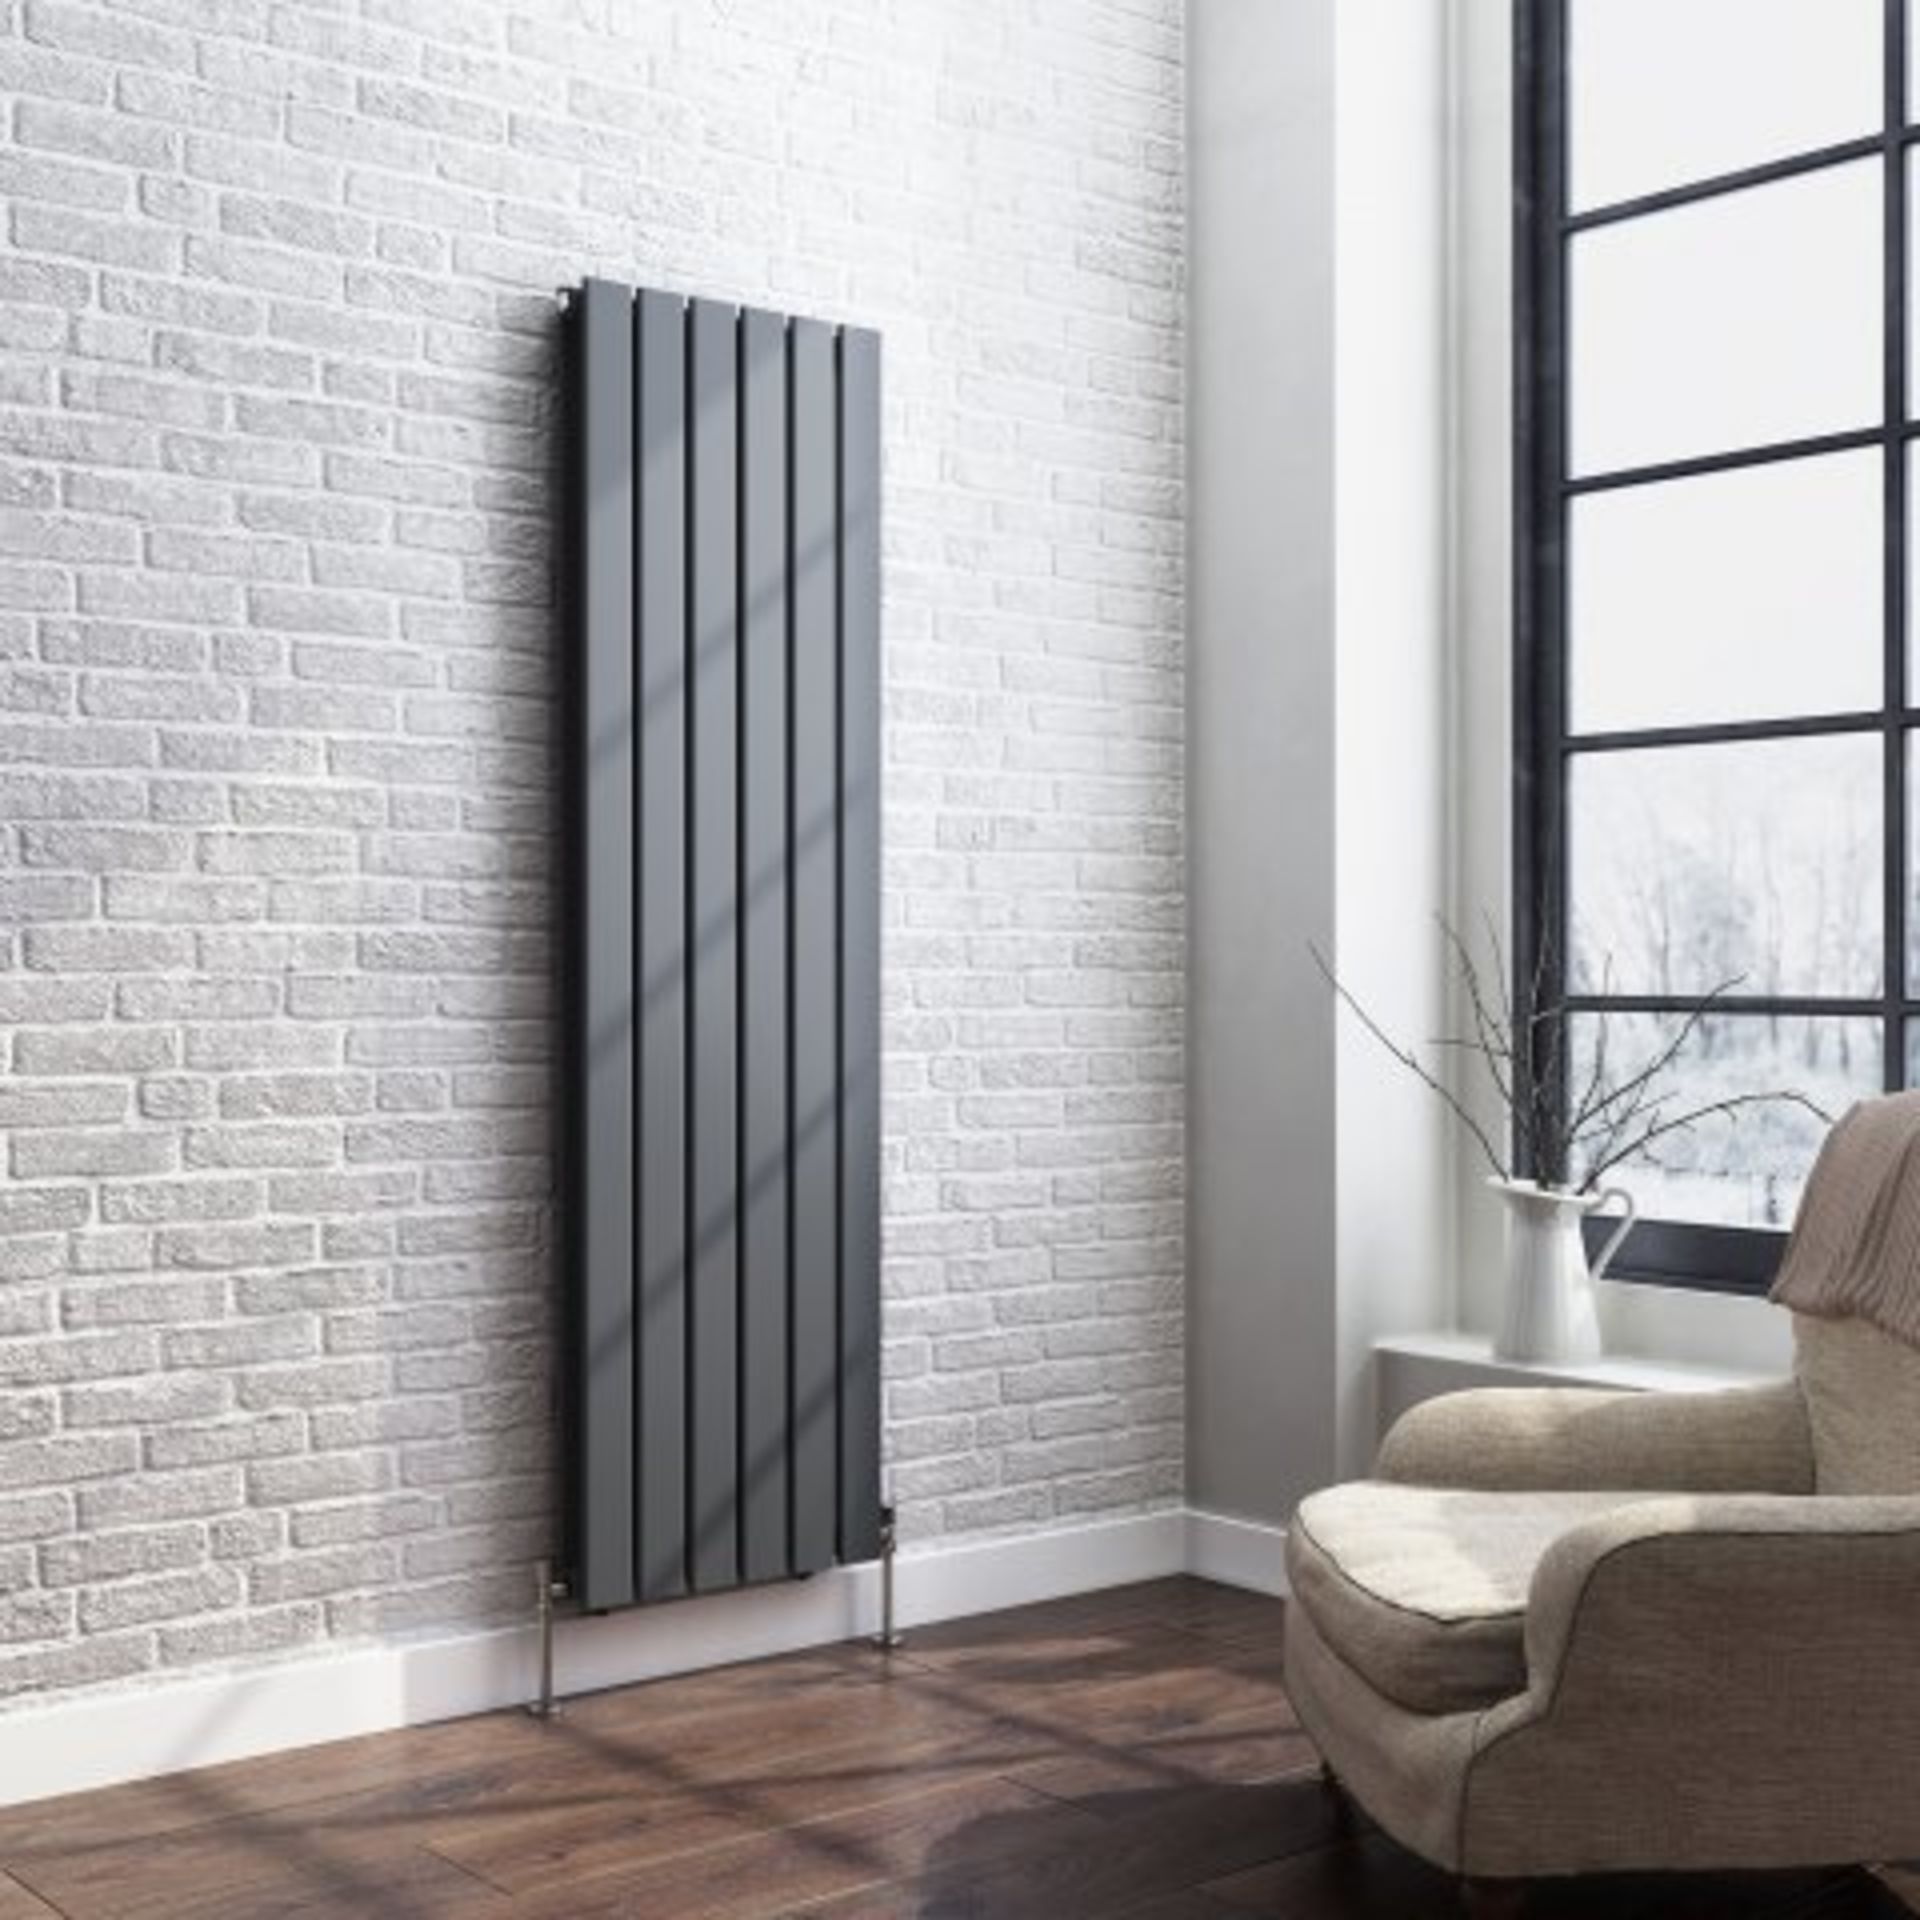 (N12) 1600x452mm Anthracite Double Flat Panel Vertical Radiator - Thera Range. RRP £474.99. Our - Image 3 of 3